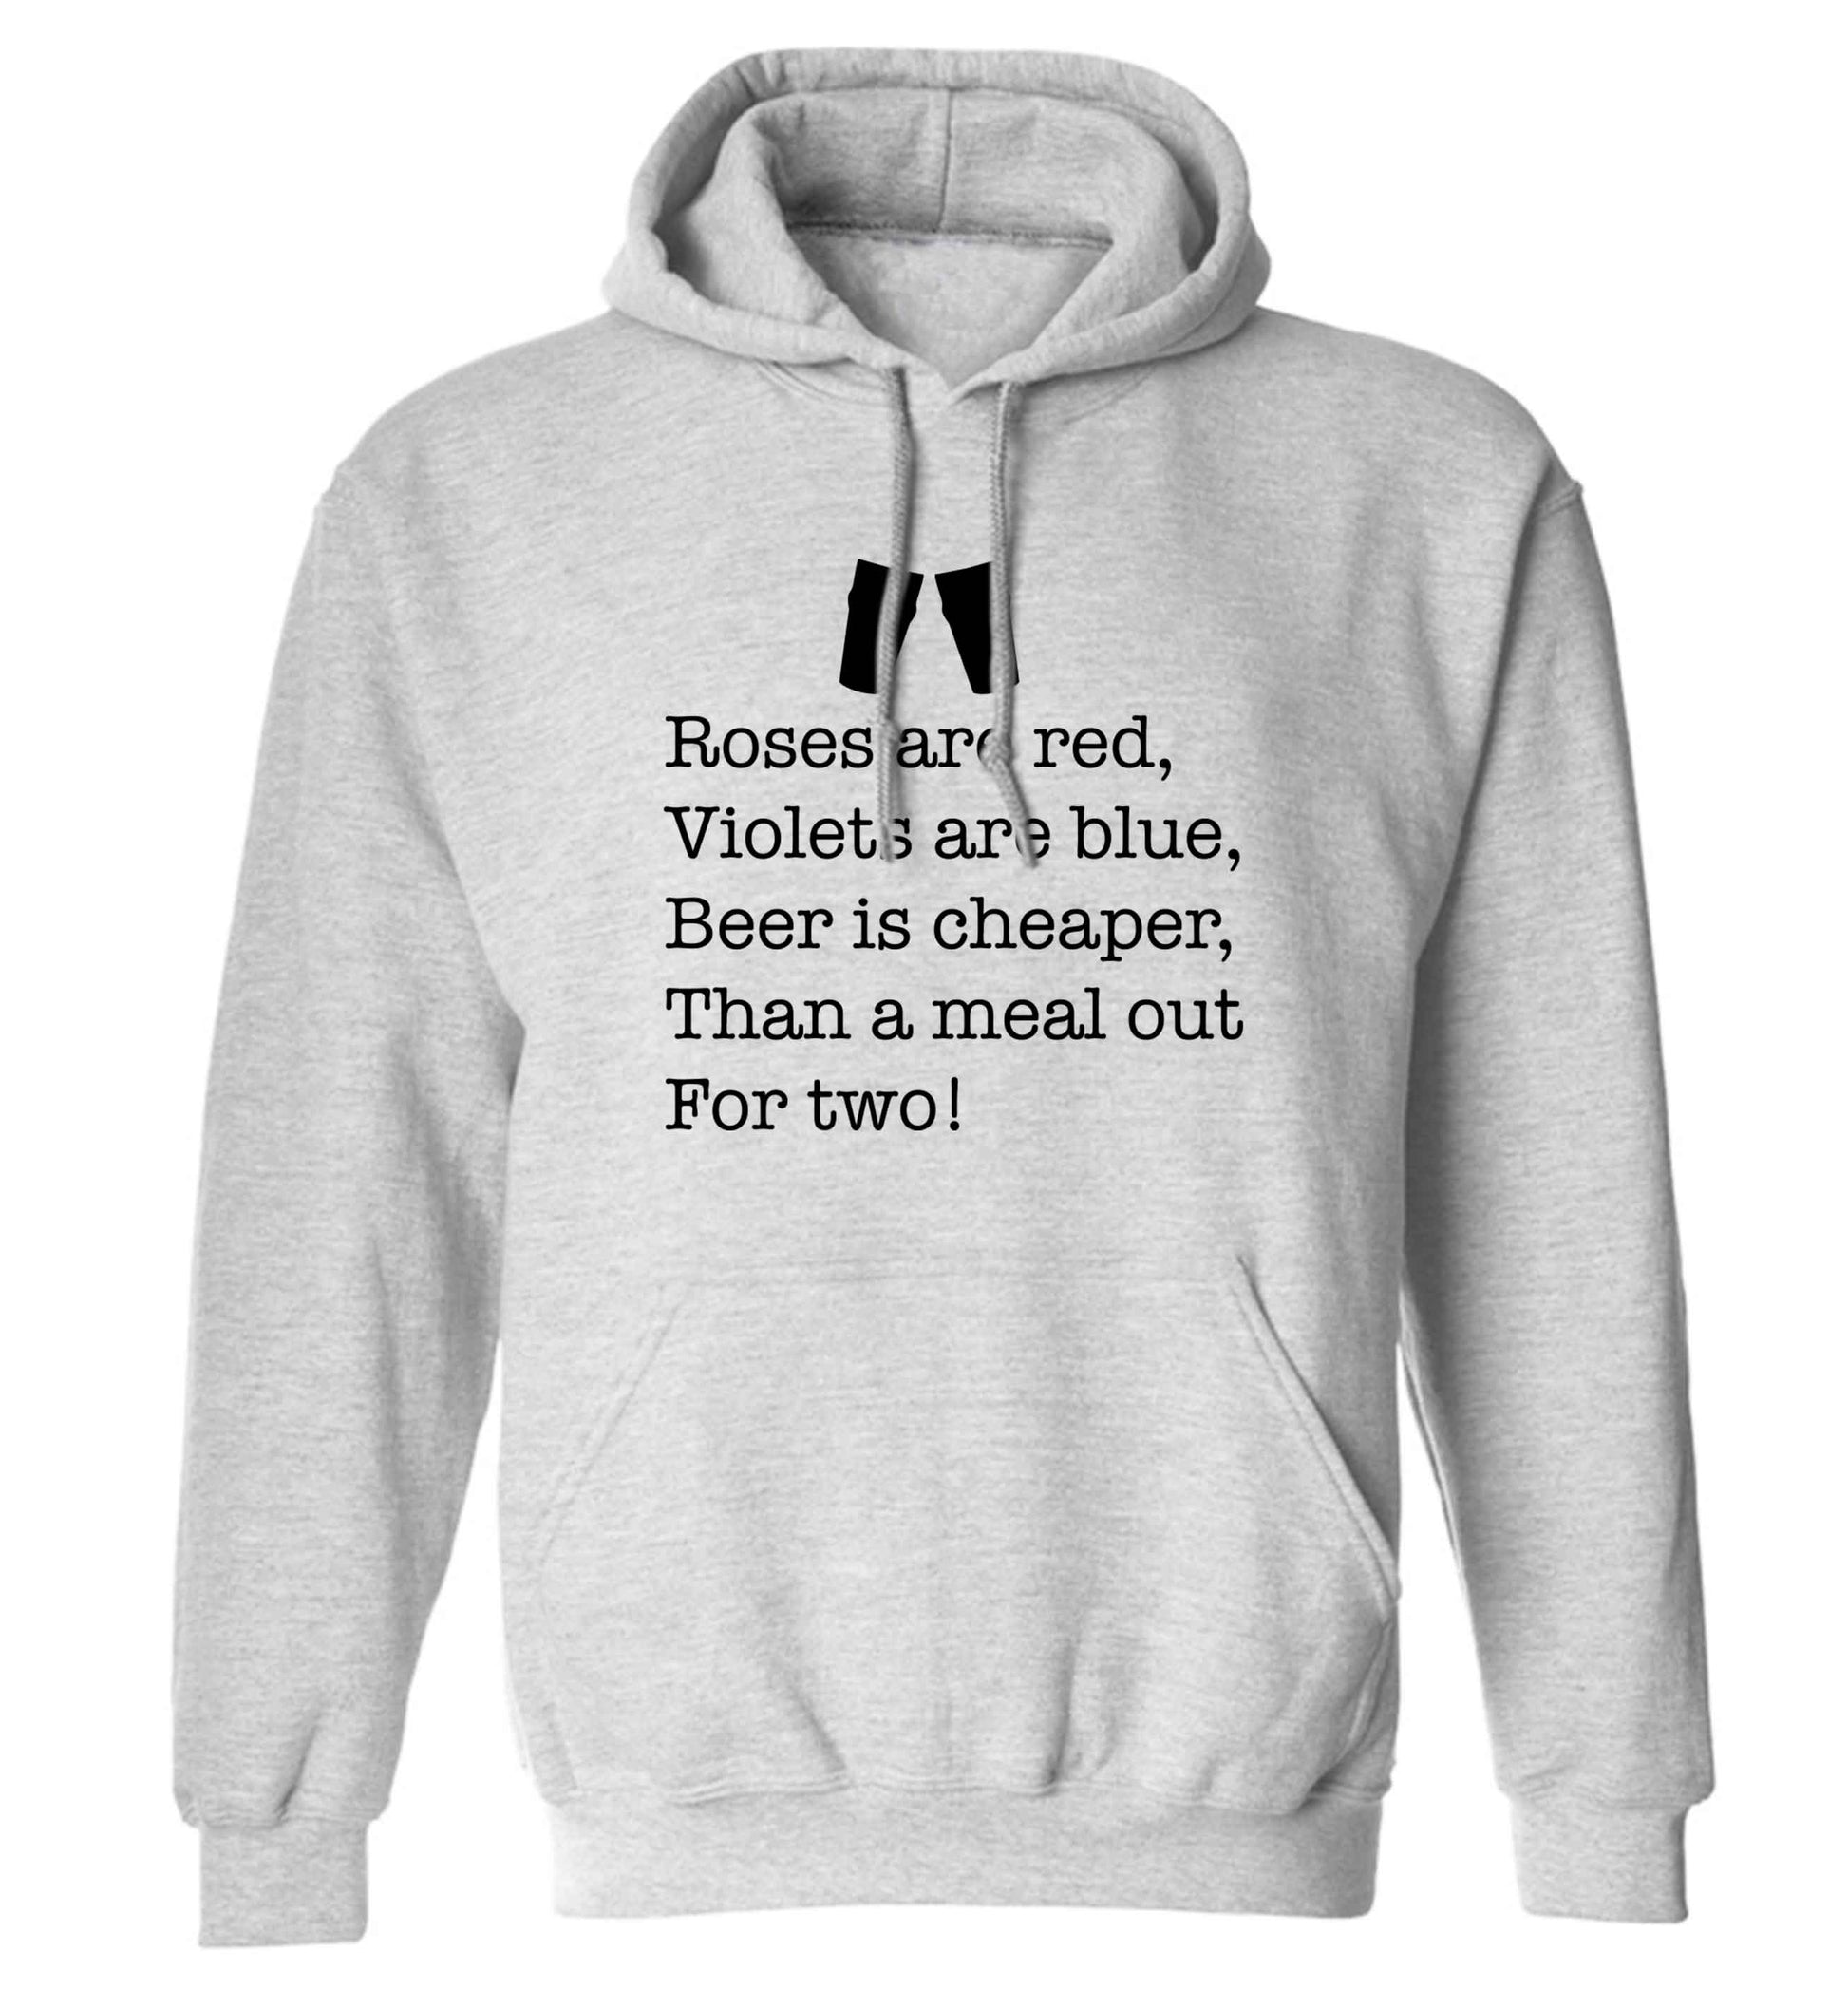 Roses are red violets are blue beer is cheaper than a meal out for two adults unisex grey hoodie 2XL